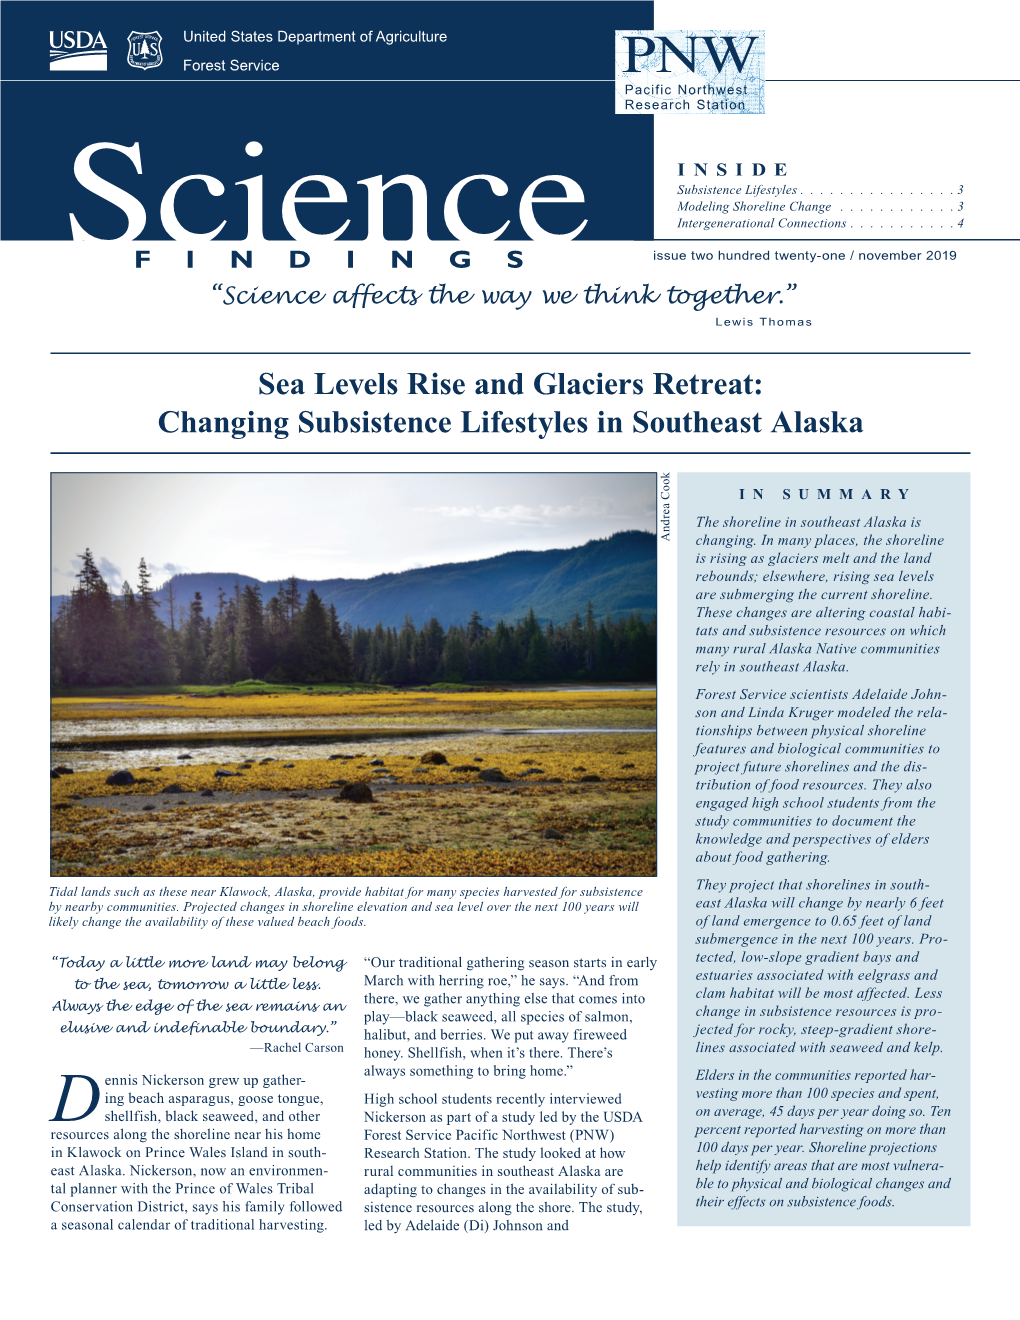 Changing Subsistence Lifestyles in Southeast Alaska